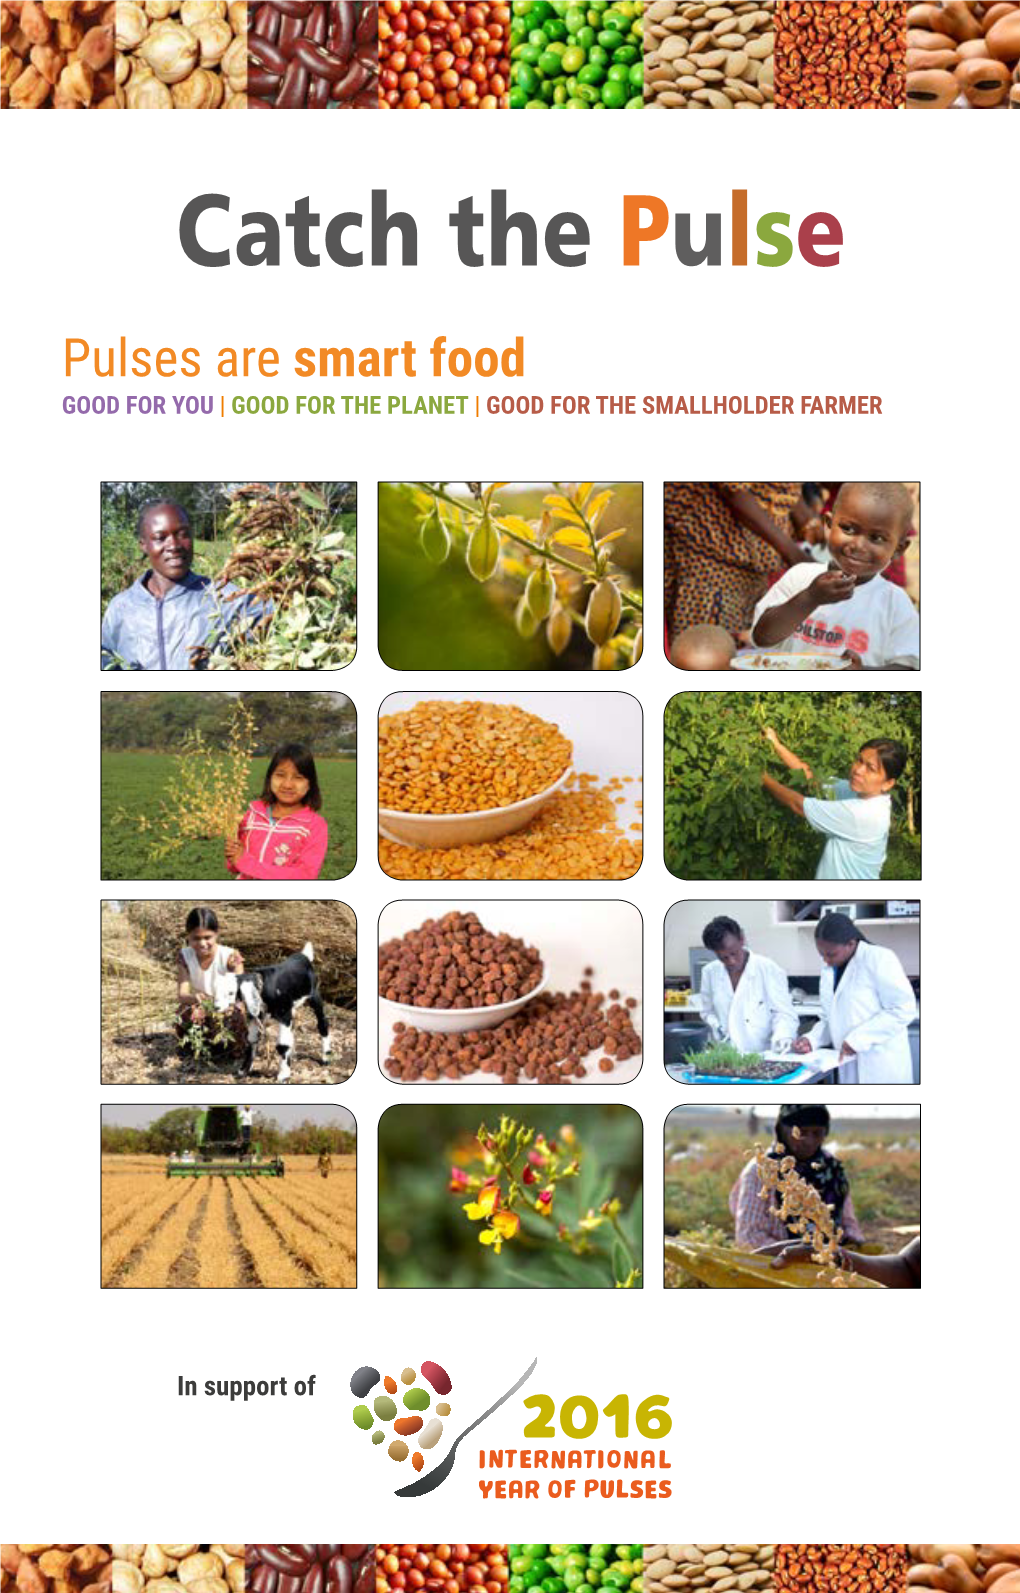 Catch the Pulse Pulses Are Smart Food GOOD for YOU | GOOD for the PLANET | GOOD for the SMALLHOLDER FARMER